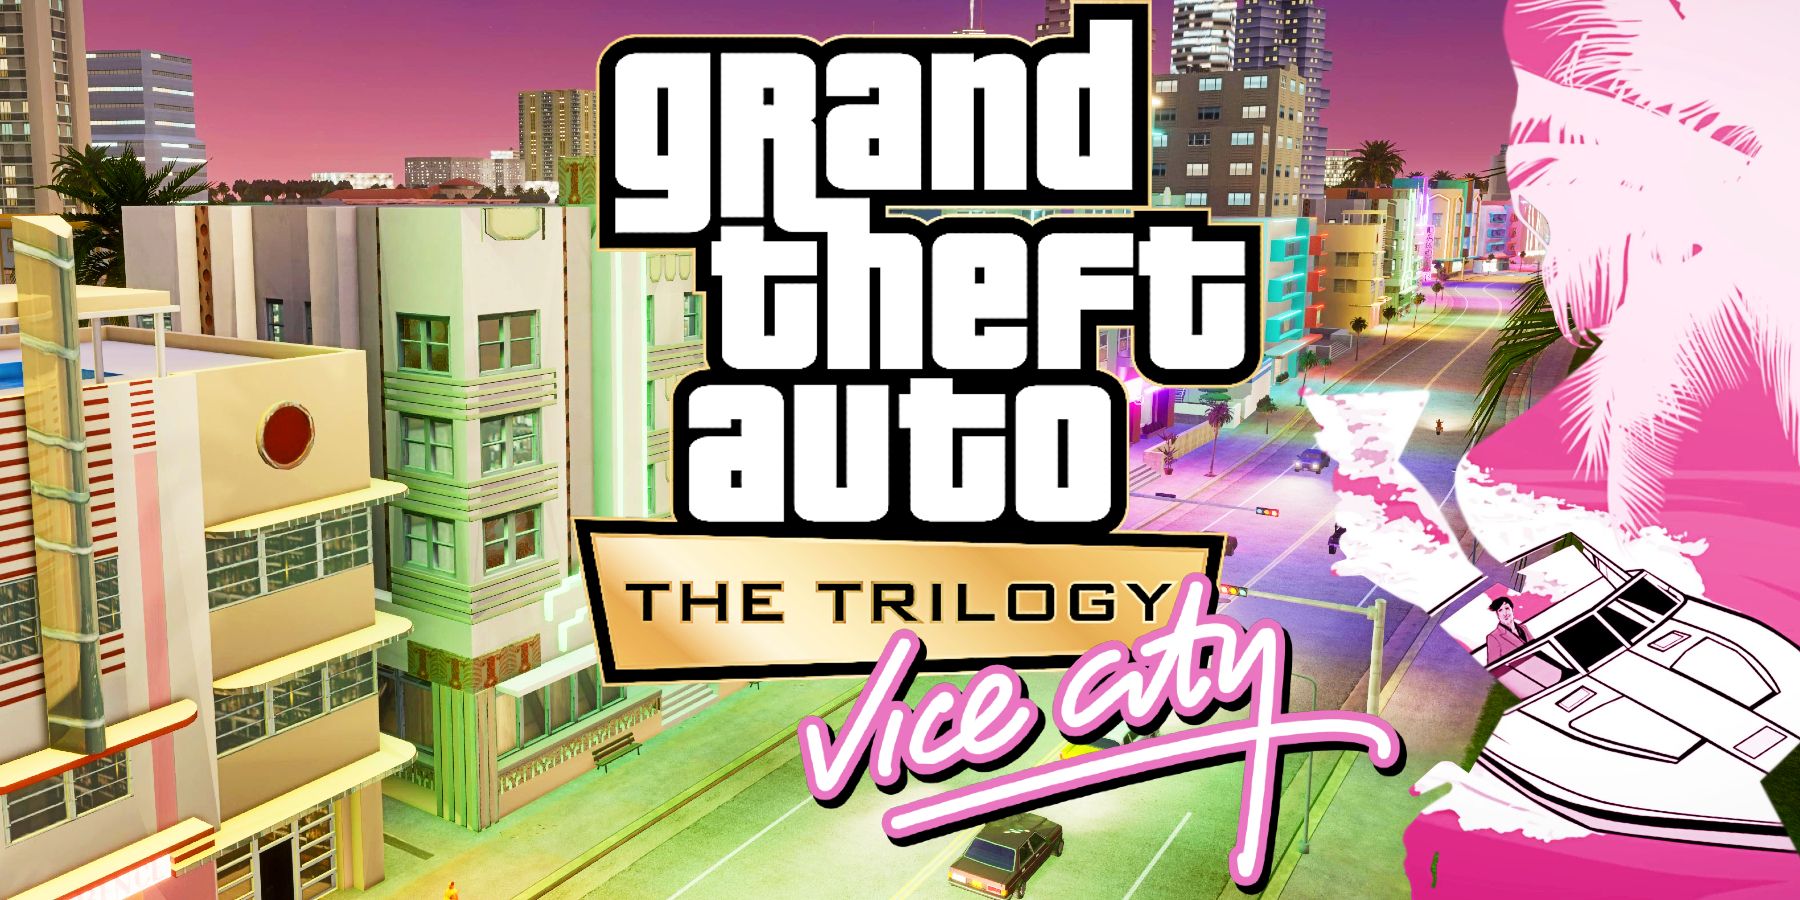 gta-vice-city-cop-land-bug-causing-major-issues